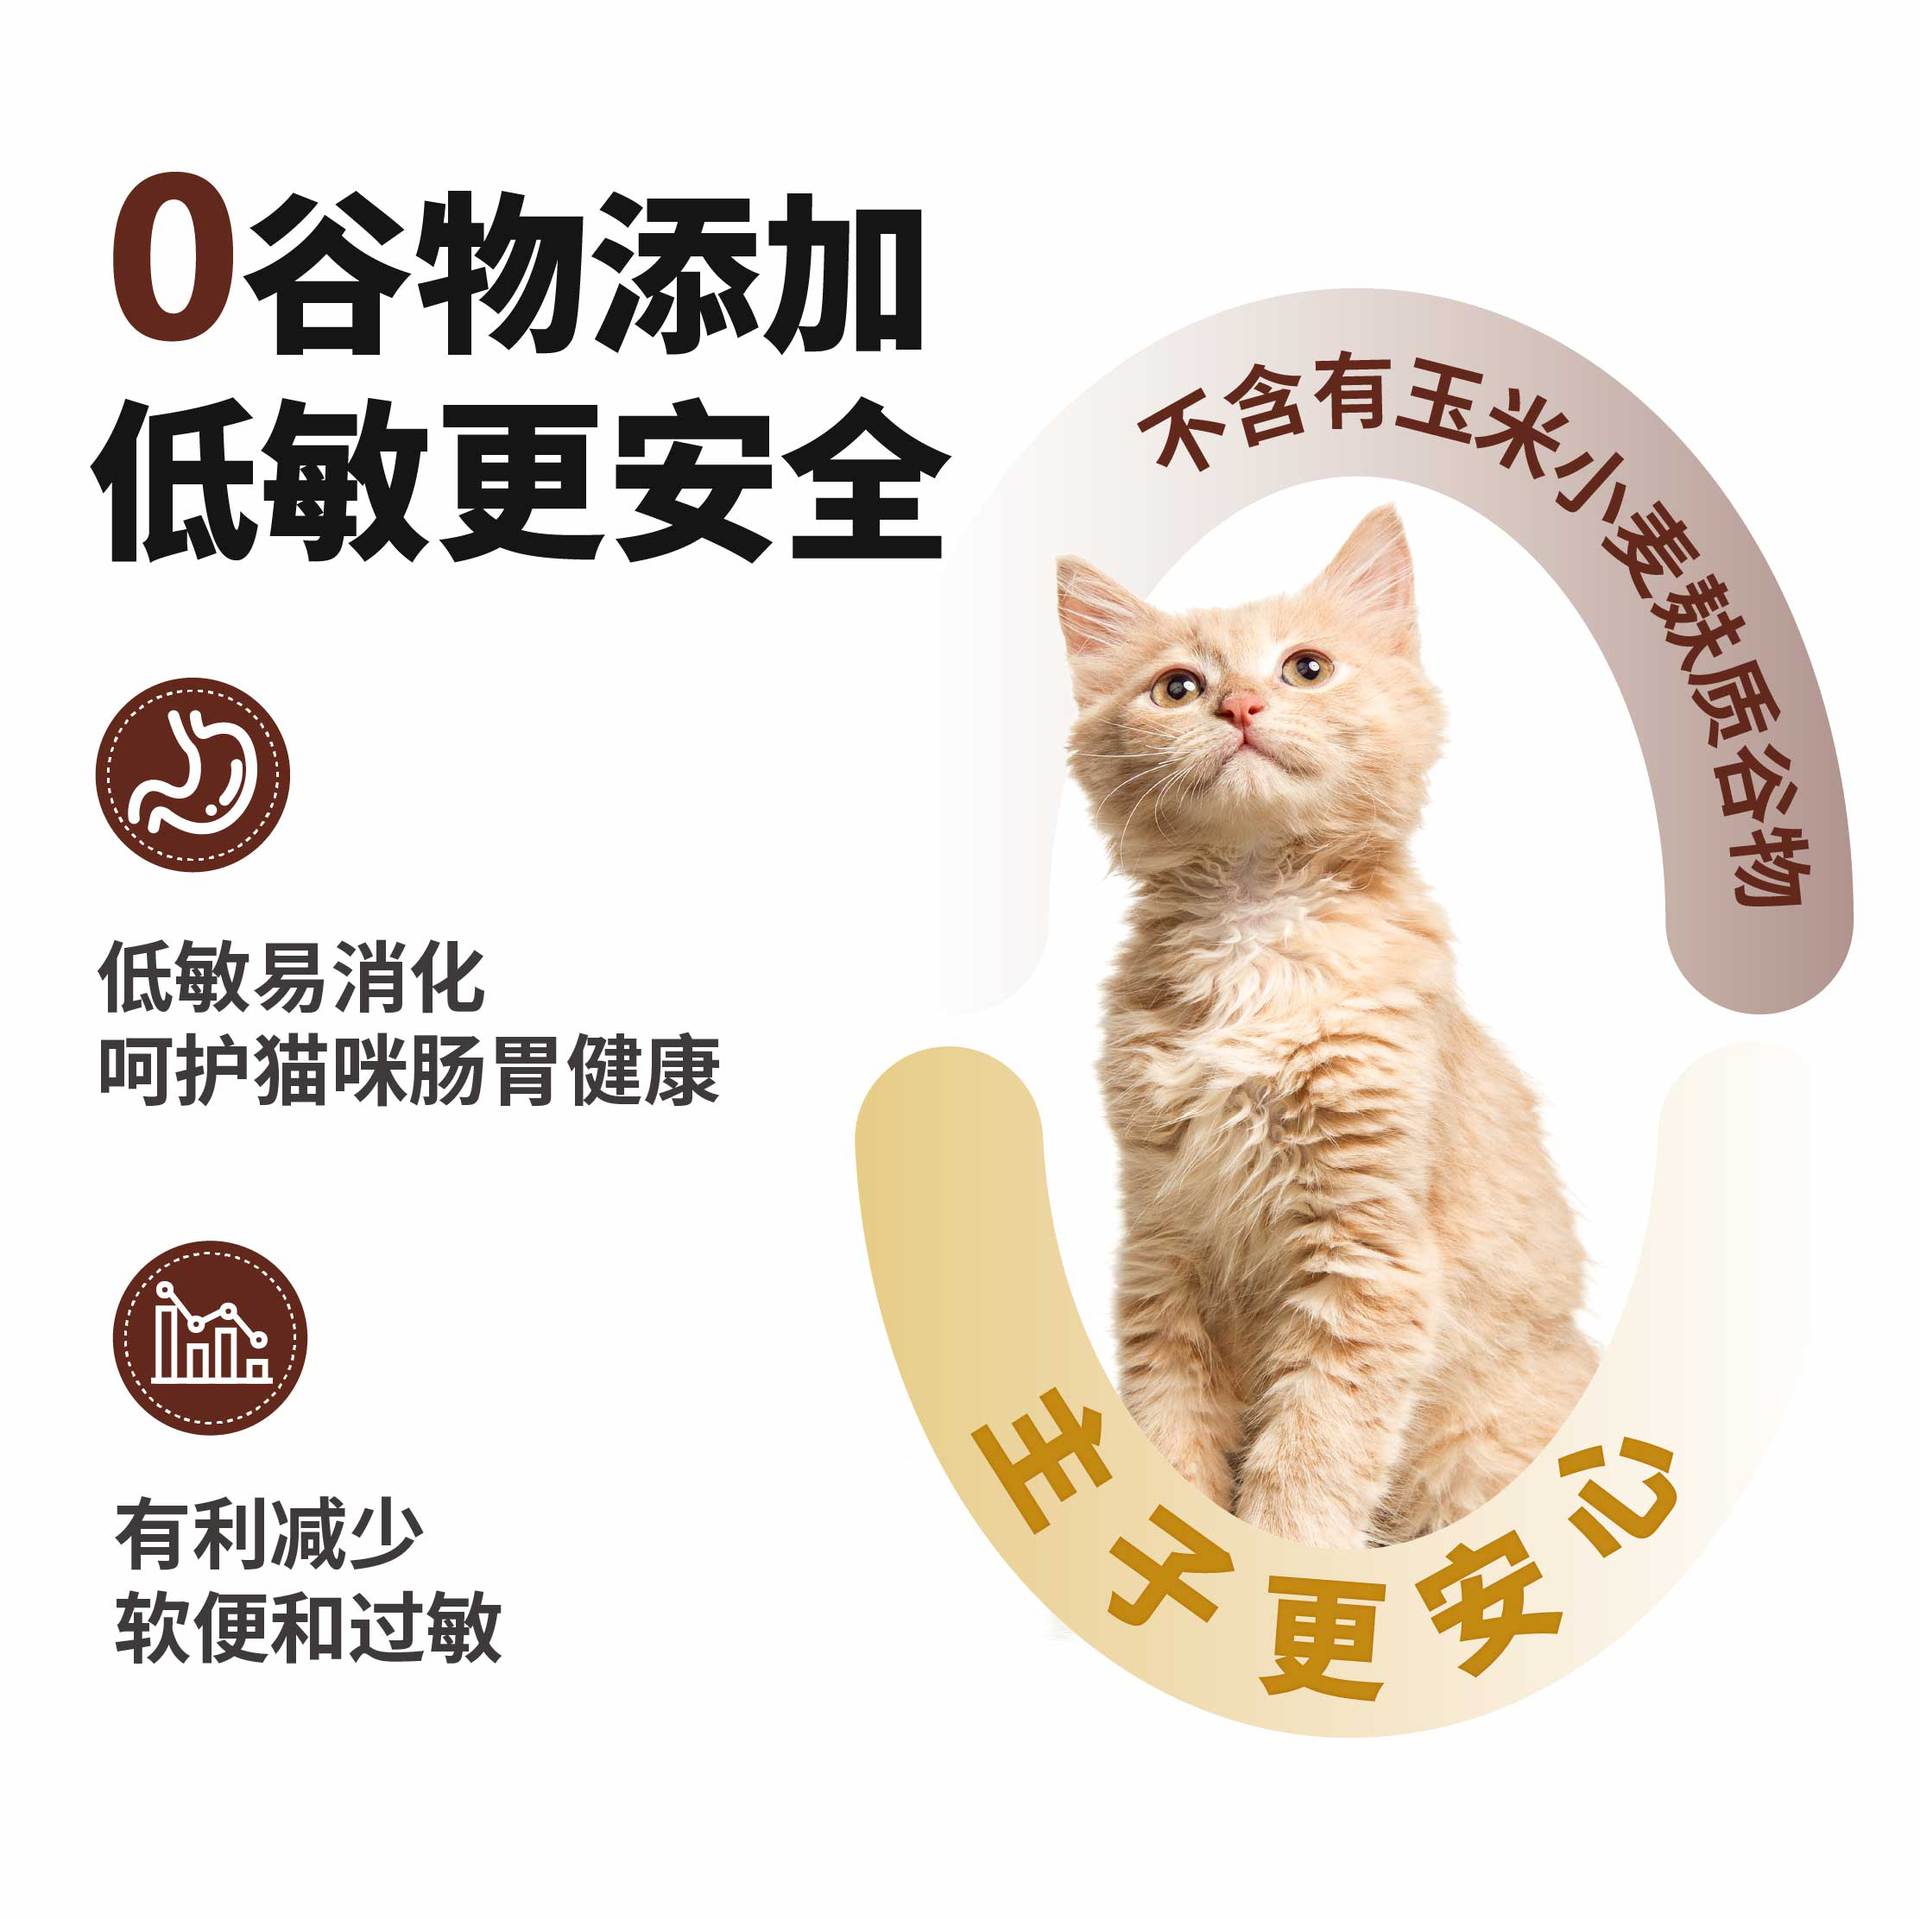 Its Nuclear Full Price No Grain Cat Food Factory Wholesale Pet Cat Food Freeze-Dried Kittens into Cat Beauty Hair Cattery Workers